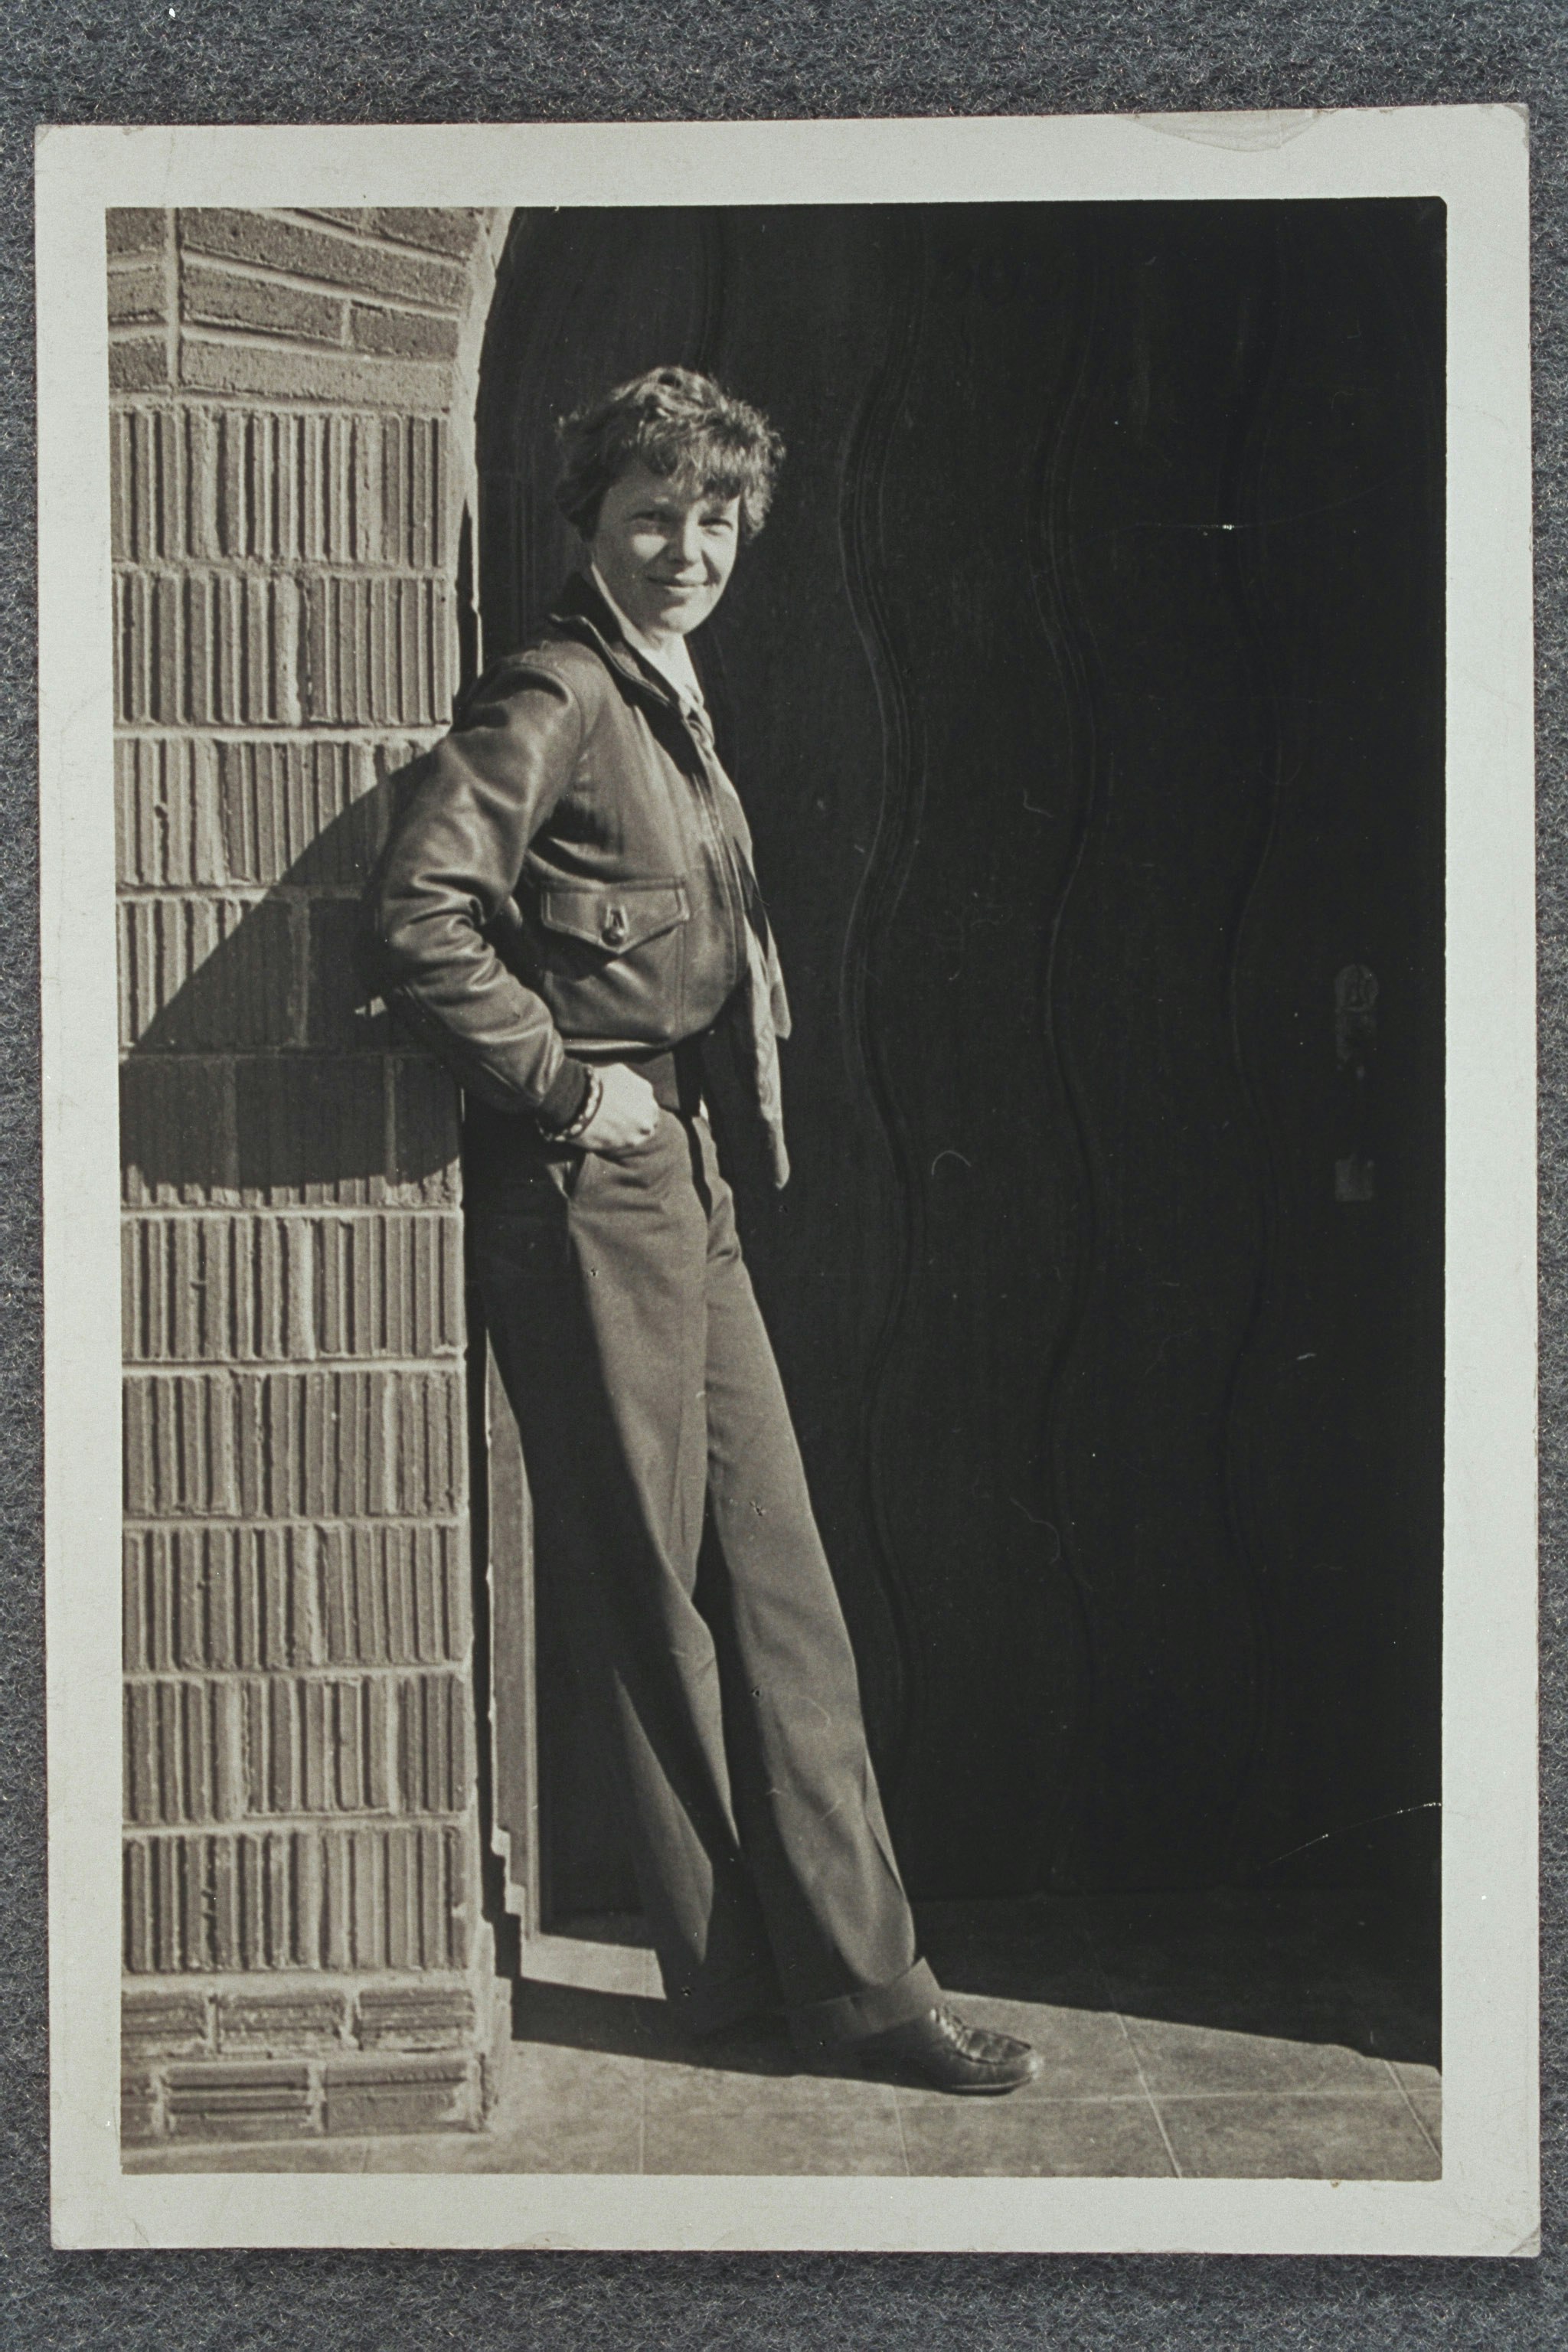 Amelia Earhart leaning against a wall